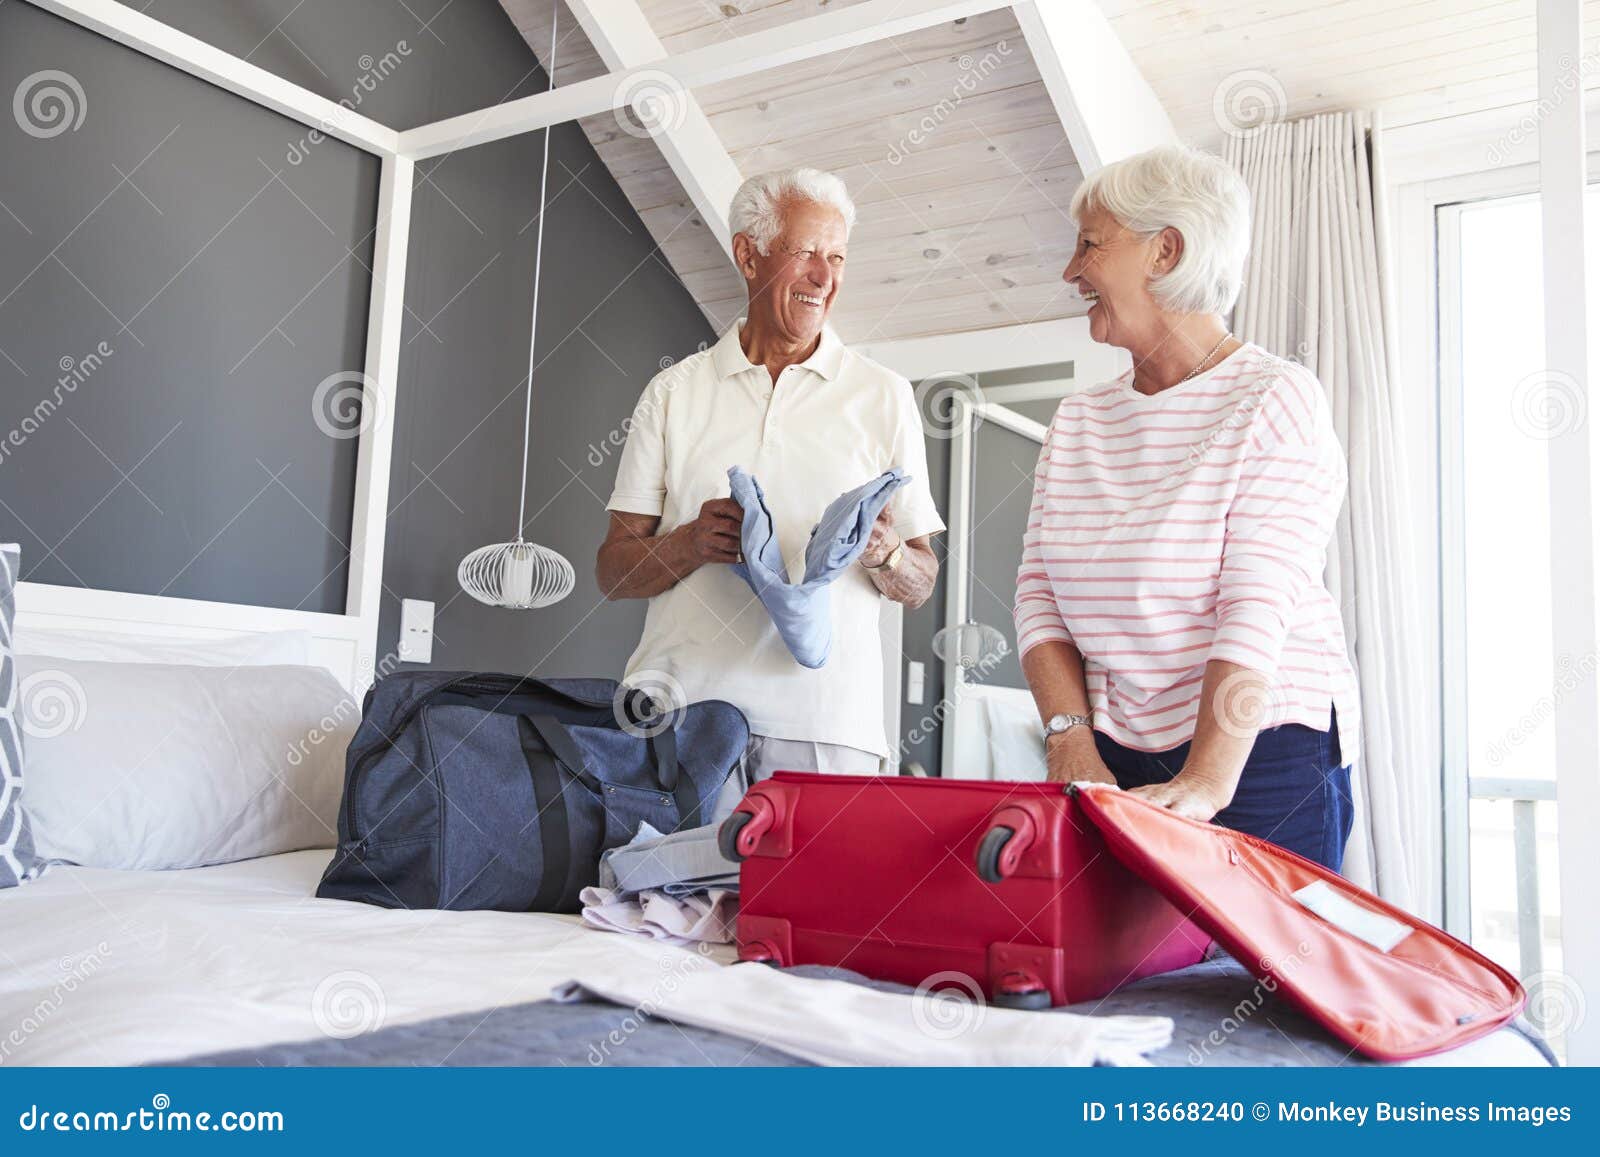 senior couple in bedroom packing suitcase for vacation